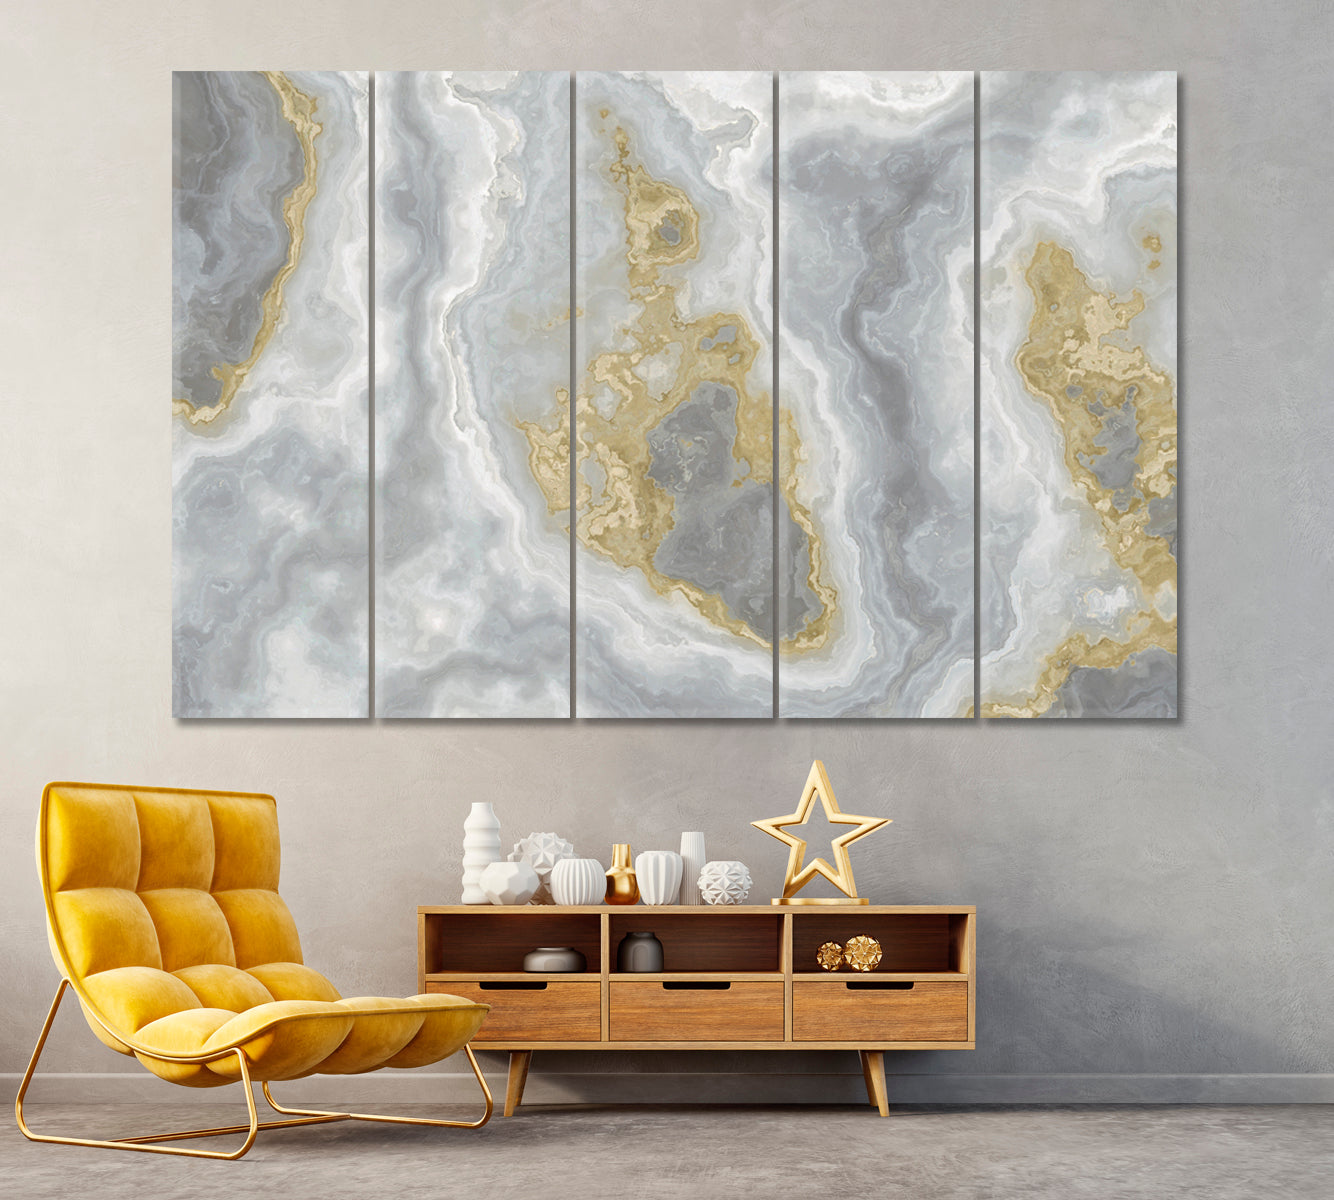 Gray Marble with Golden Veins Canvas Print ArtLexy 5 Panels 36"x24" inches 